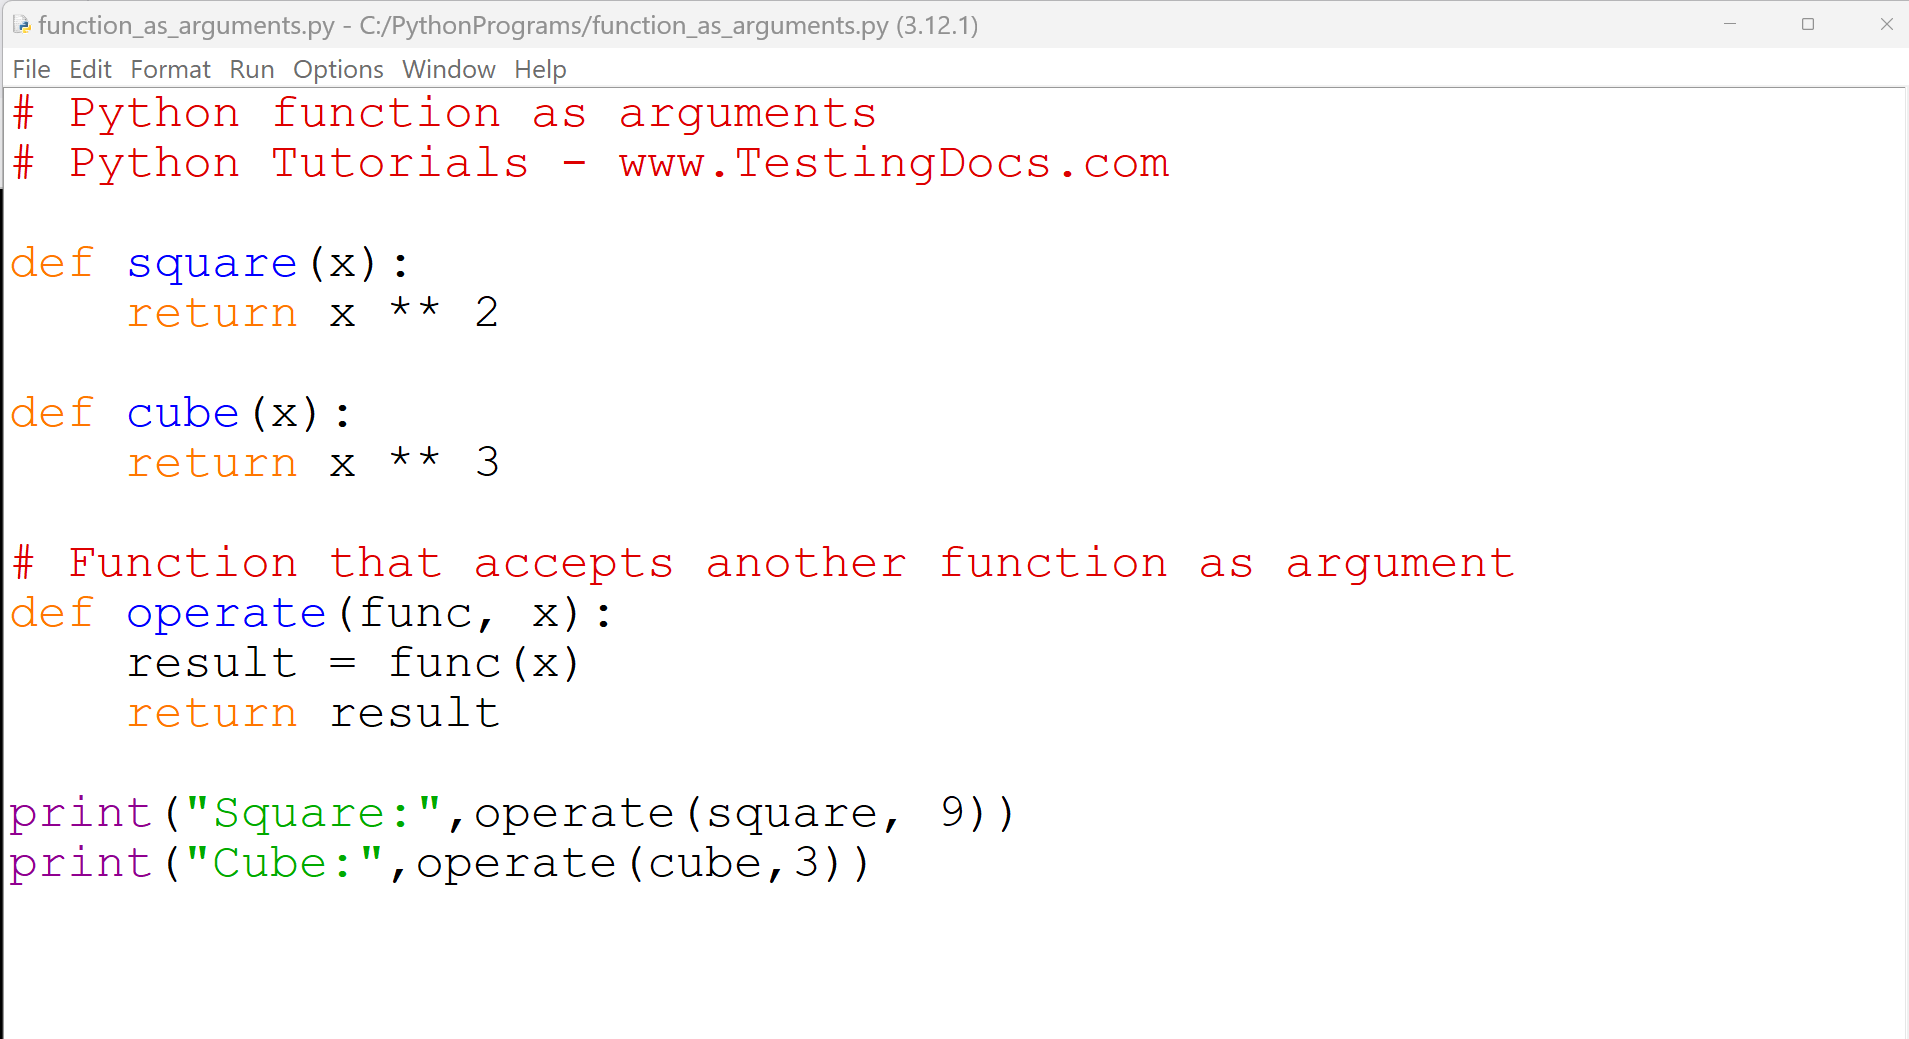 Python Function as Arguments